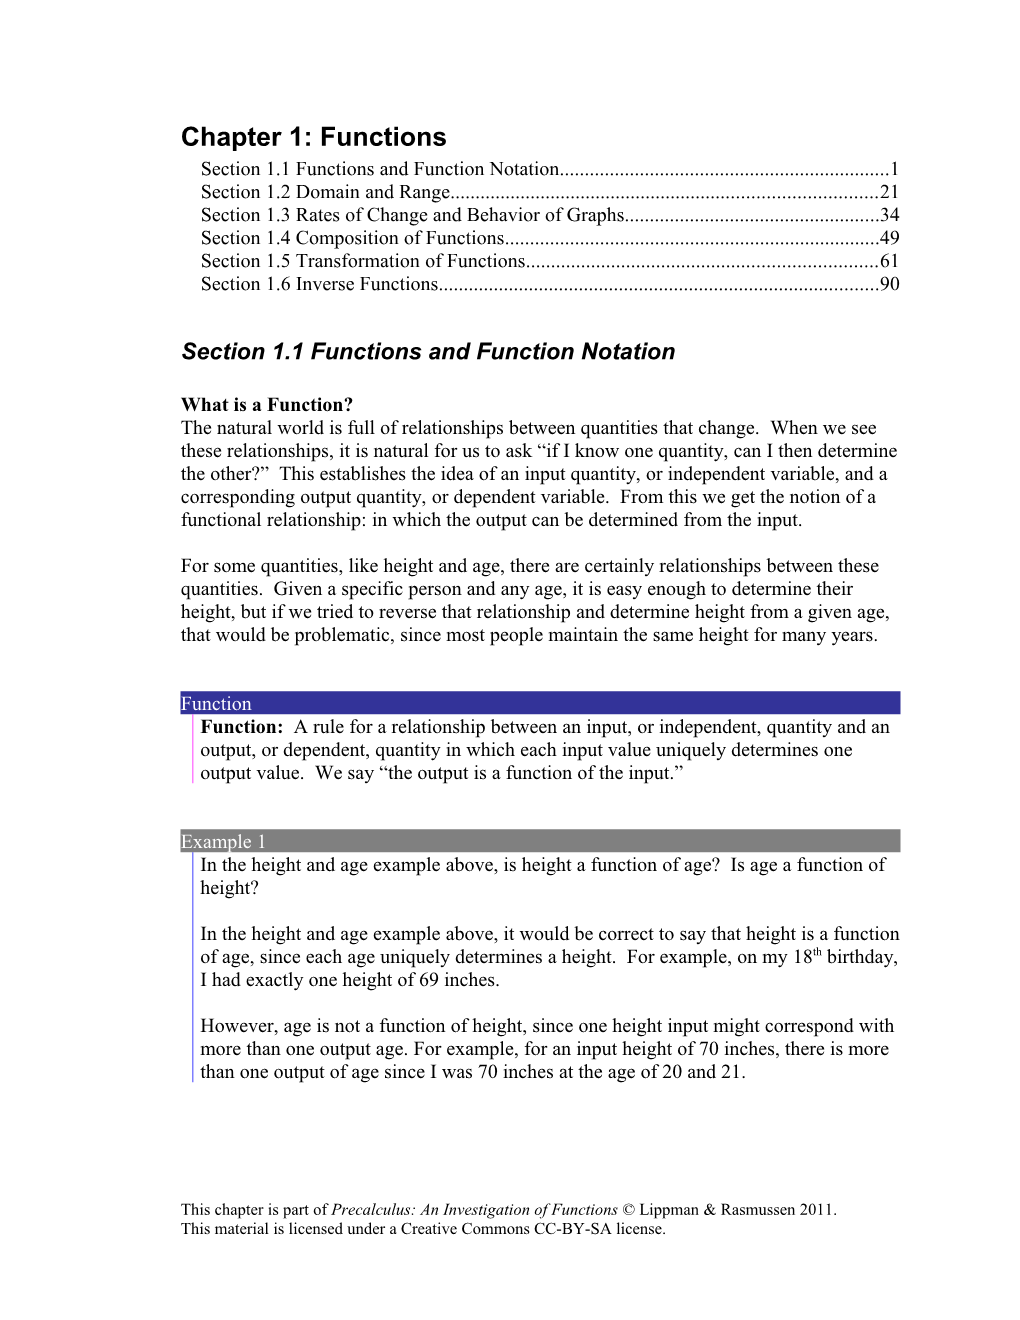 Section 1.1 Functions and Function Notation s1